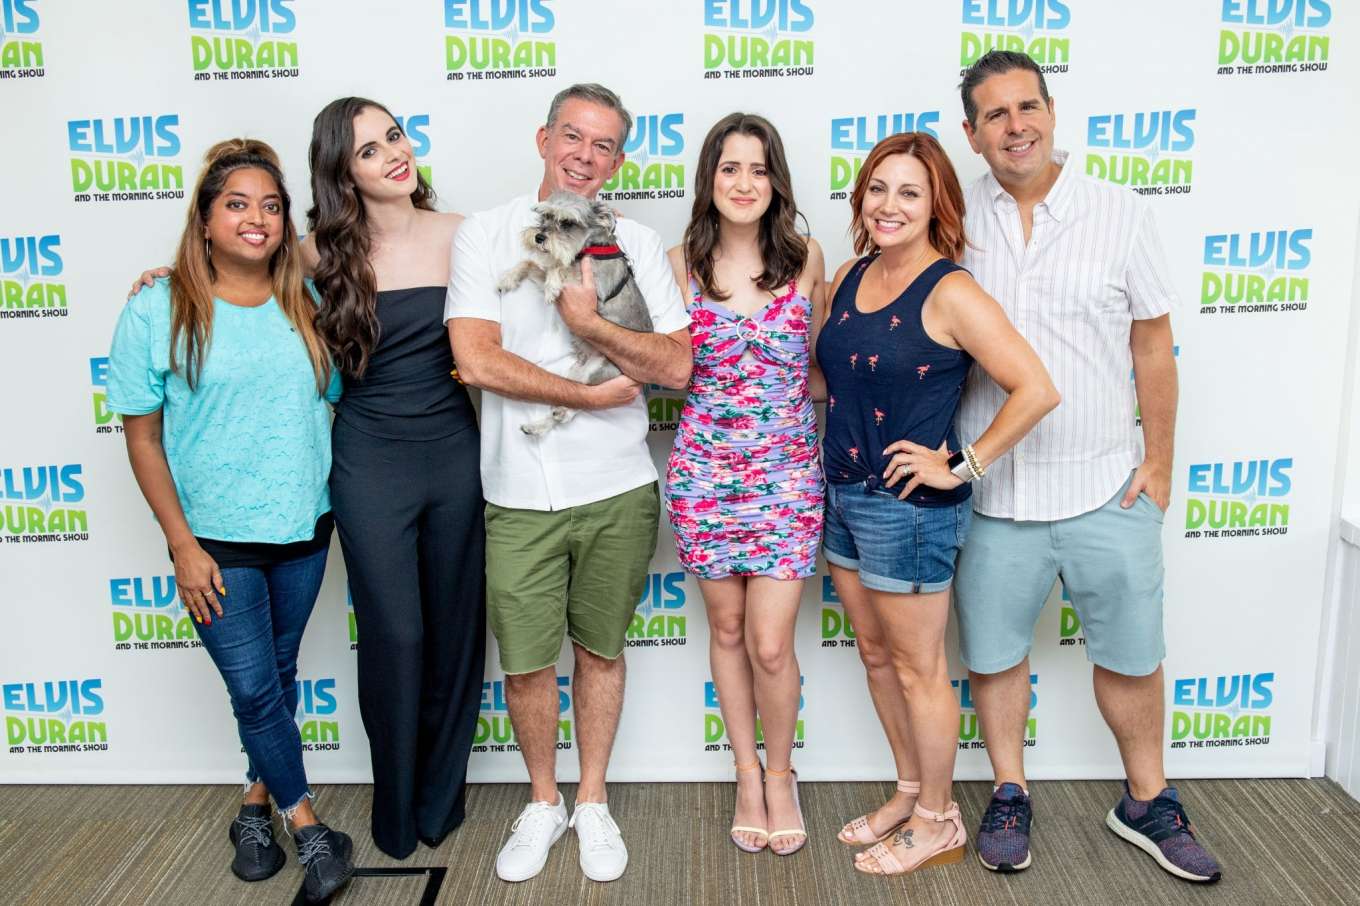 Laura and Vanessa Marano â€“ Visit â€˜Elvis Duran and The Z100 Morning Showâ€™ to discuss â€˜Saving Zoeâ€™ in NYC